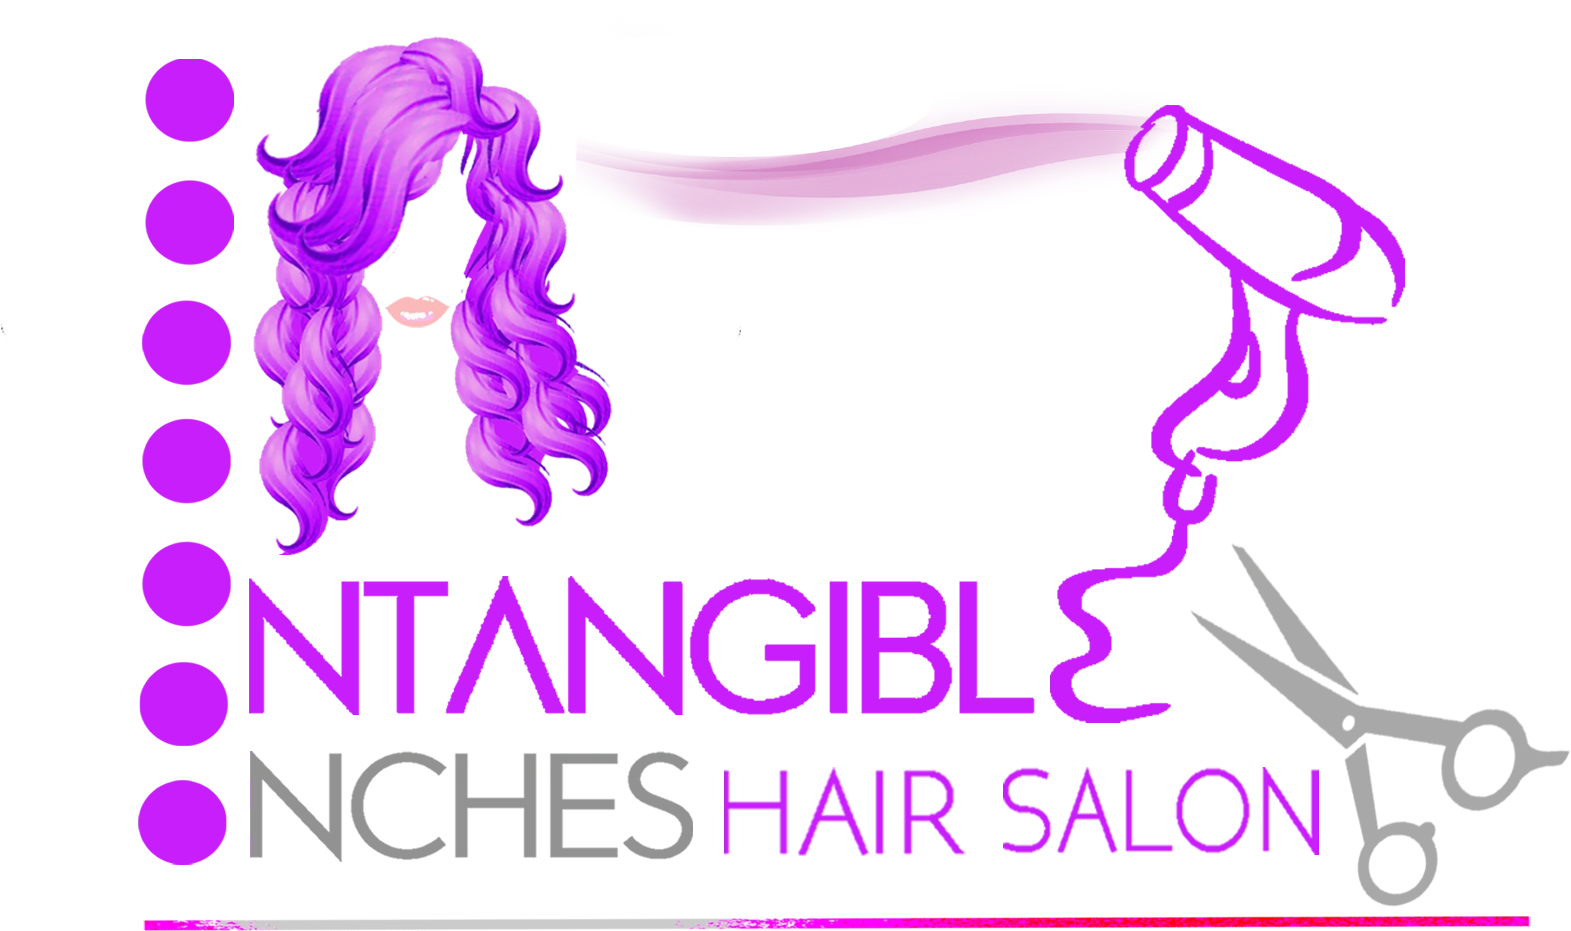 Intangible Inches Hair Salon Logo PNG image